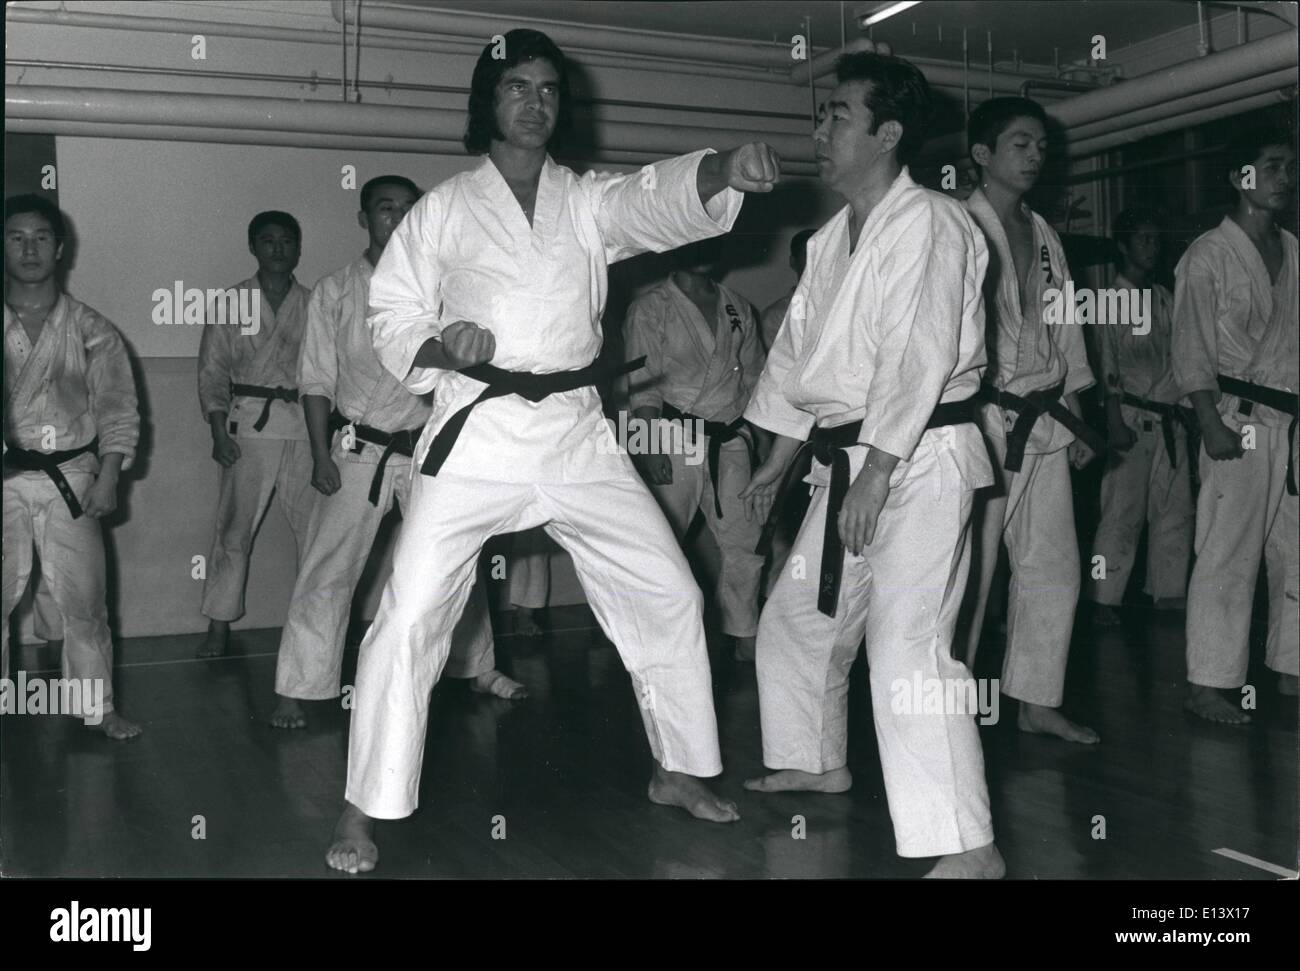 Mar. 27, 2012 - Humperdinck Learns Karate In Tokyo. Singing star Engelbert Humperdinck who is in Japan to give five concerts, is using his time off-stage to practice Karate with students of the Nihon University at their gymnasium in Tokyo. The question is being asked, if Engelbert feels the time has come to defend himself from over-enthusiastic 'fans' who in their excitement may attempt to cut locks of his hair, or cut pieces of his clothing as priceless souvenirs ? Photo: Engelbert Humperdinck in training with Karate students at the Nihon University gymnasium in Tokyo. Stock Photo